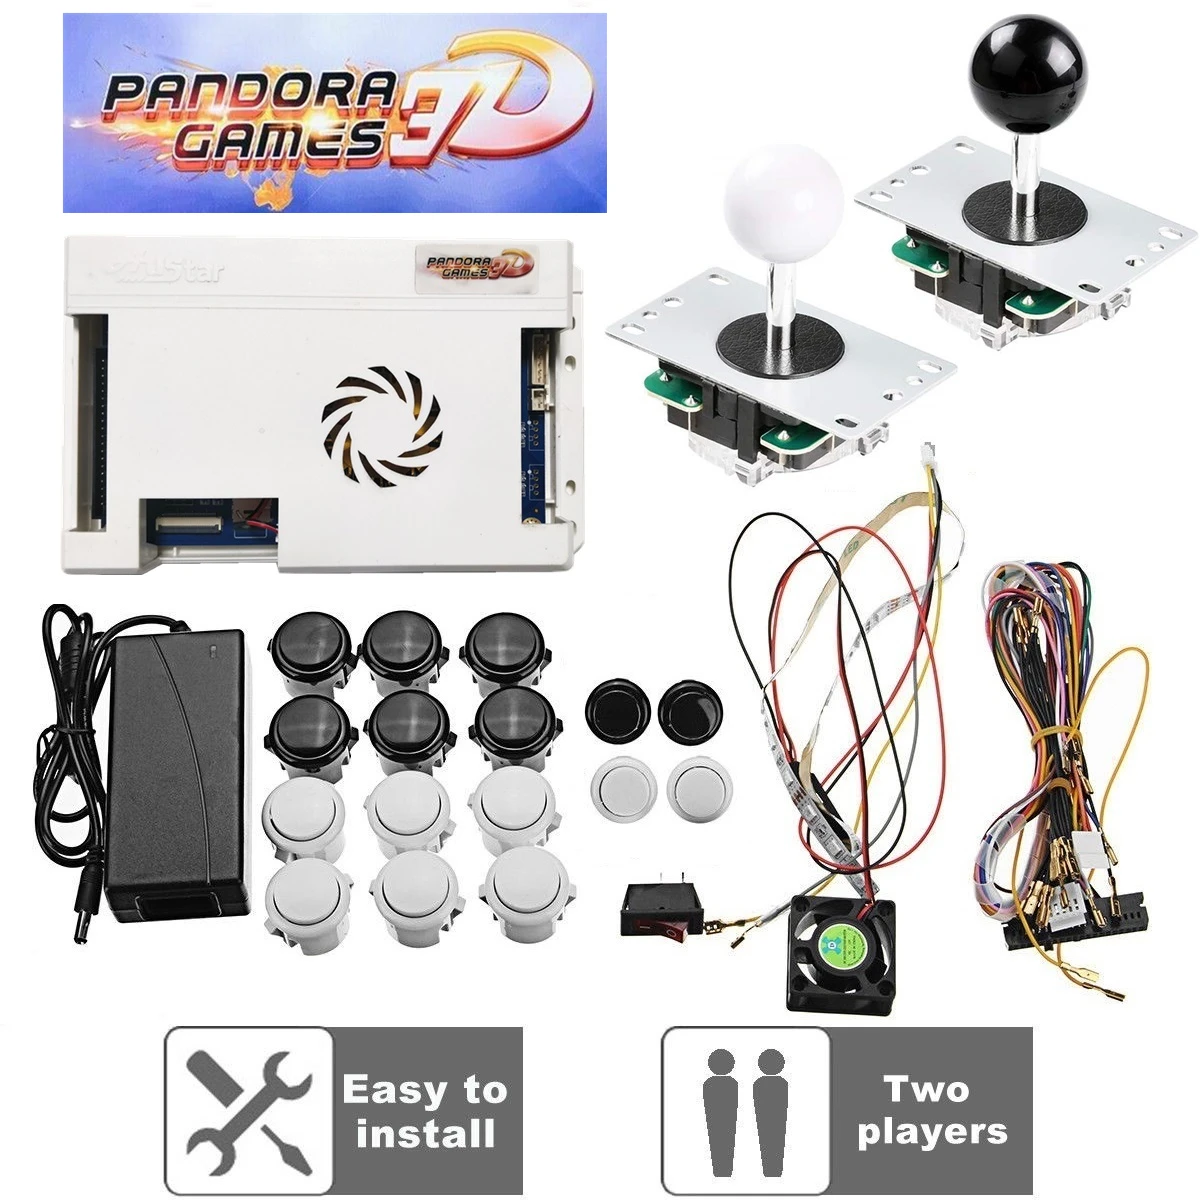 4018 Games Wifi Download Pandora Games 3d 4018 In 1 2d/3d Arcade Kit Tens Of Thousands In The Built-in Game - Accessories - AliExpress